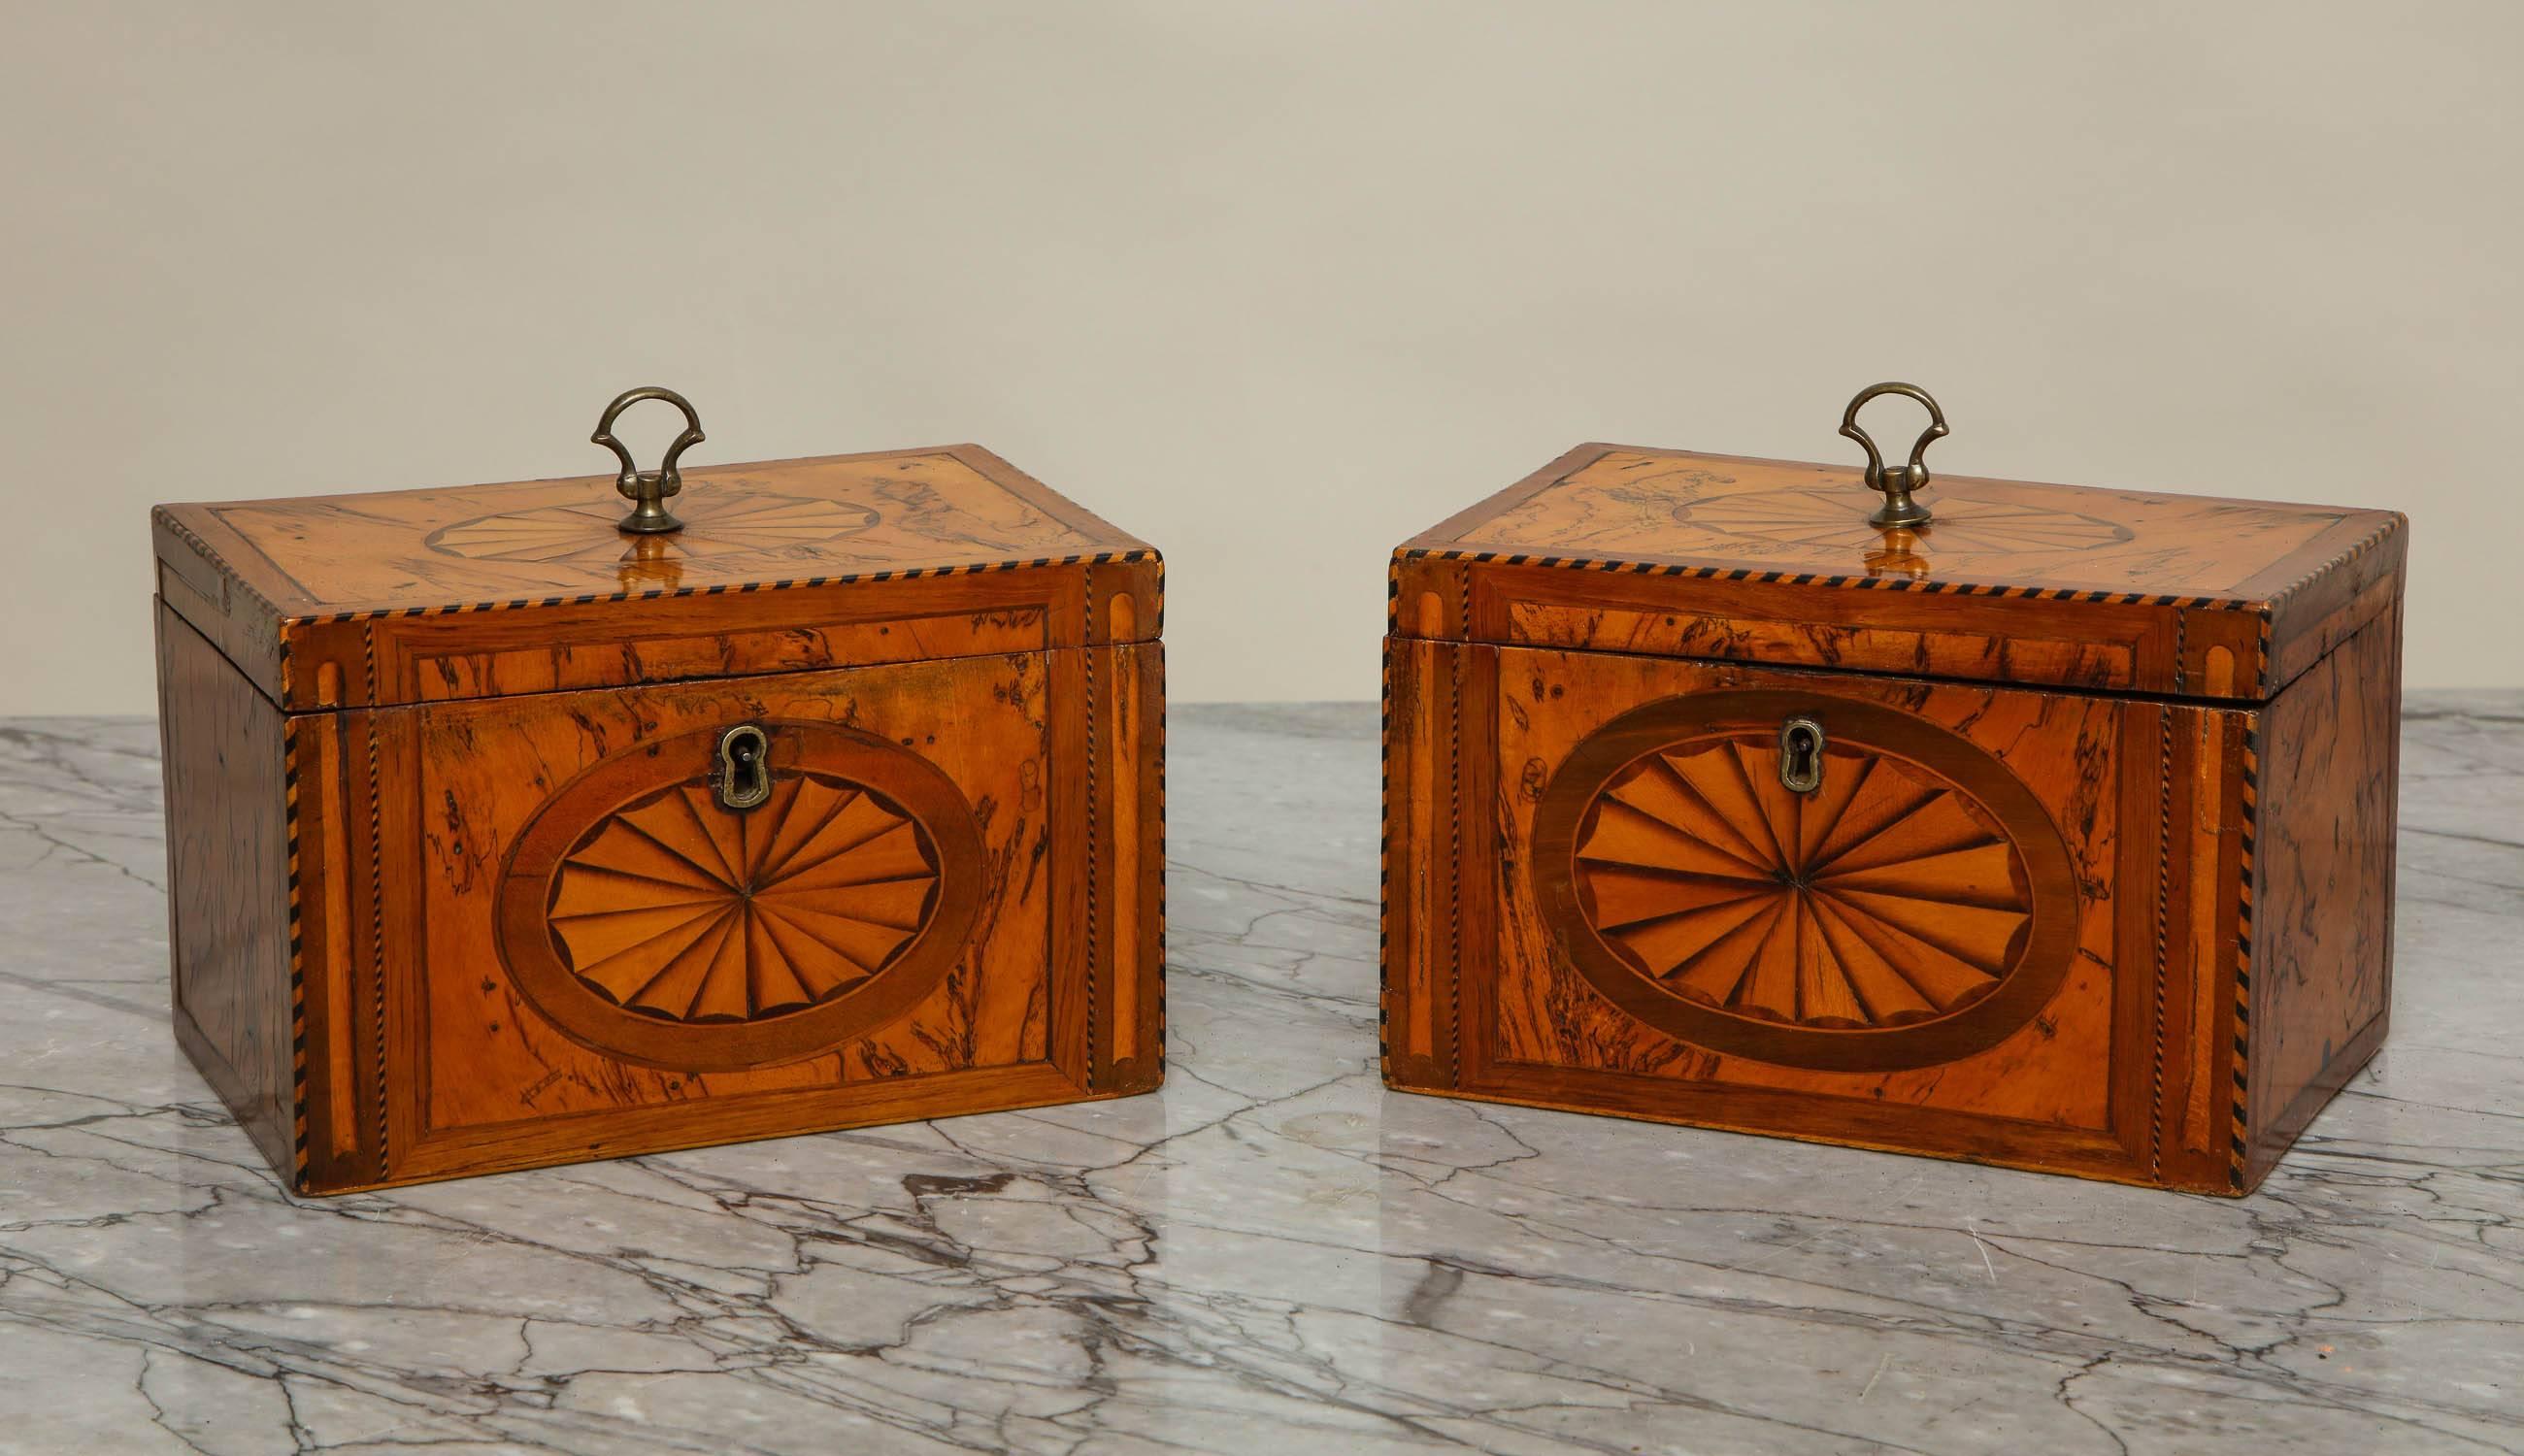 Unusual pair of George III boxes, having patera inlaid tops and fronts on a spalted walnut ground and with original gilt lacquer axe head handles, one fitted with two compartments, the other as a large, undivided interior, both retaining original